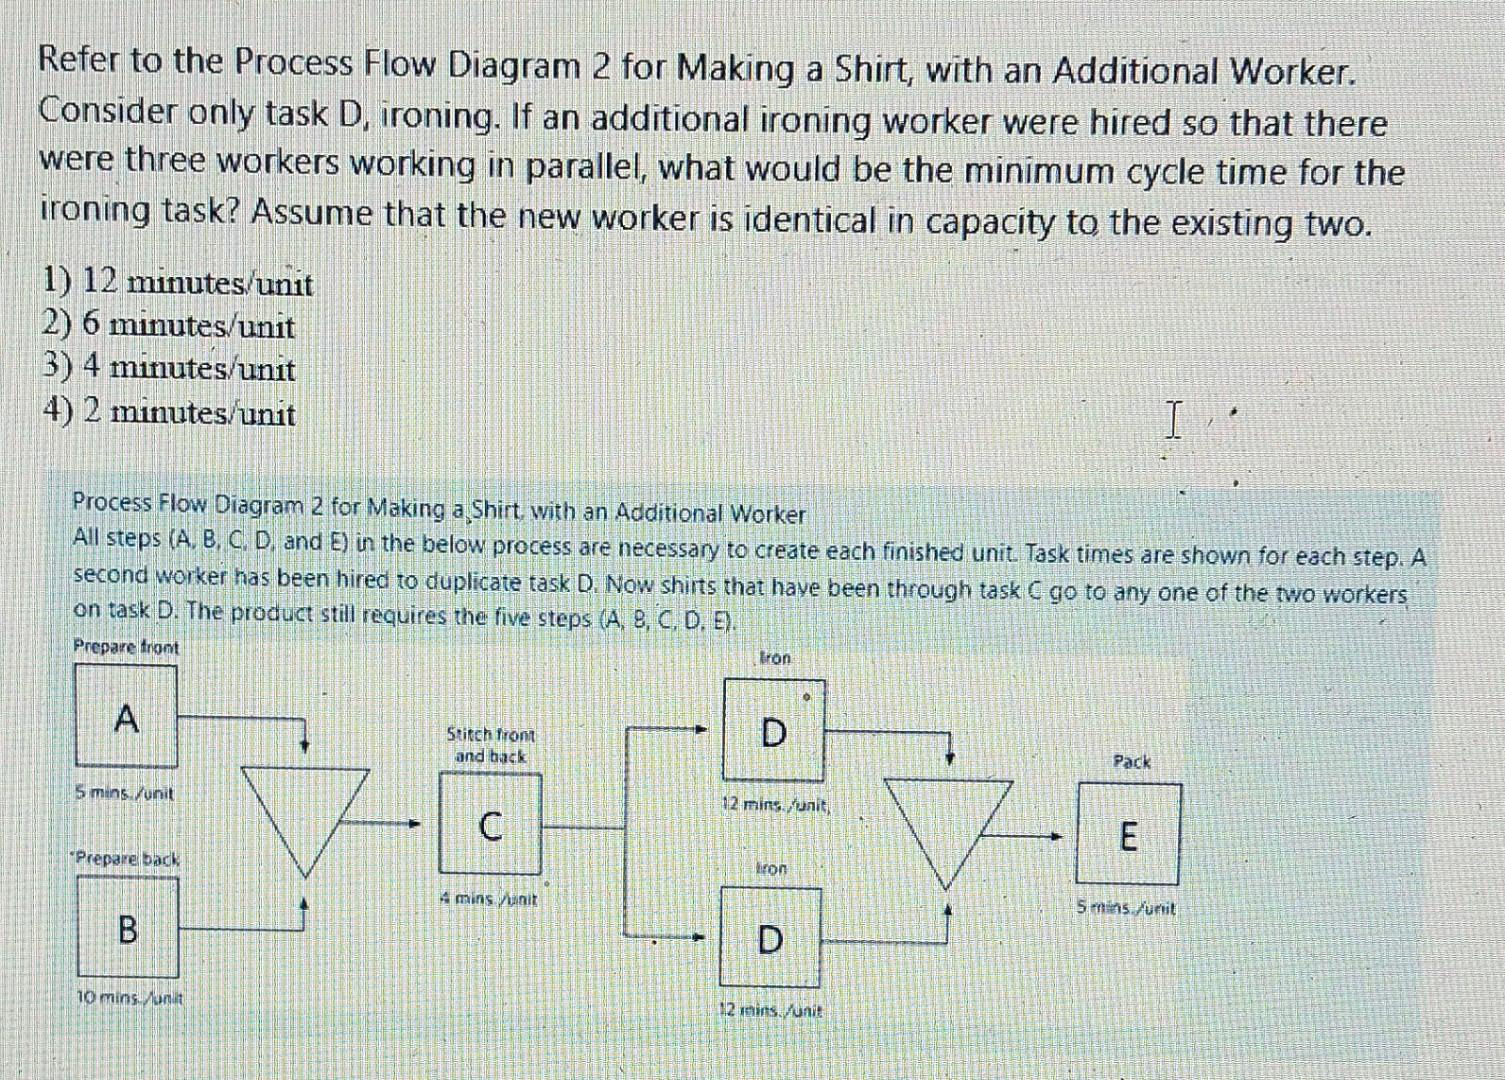 Refer to the Process Flow Diagram 2 for Making a Shirt, with an Additional Worker. Consider only task D,